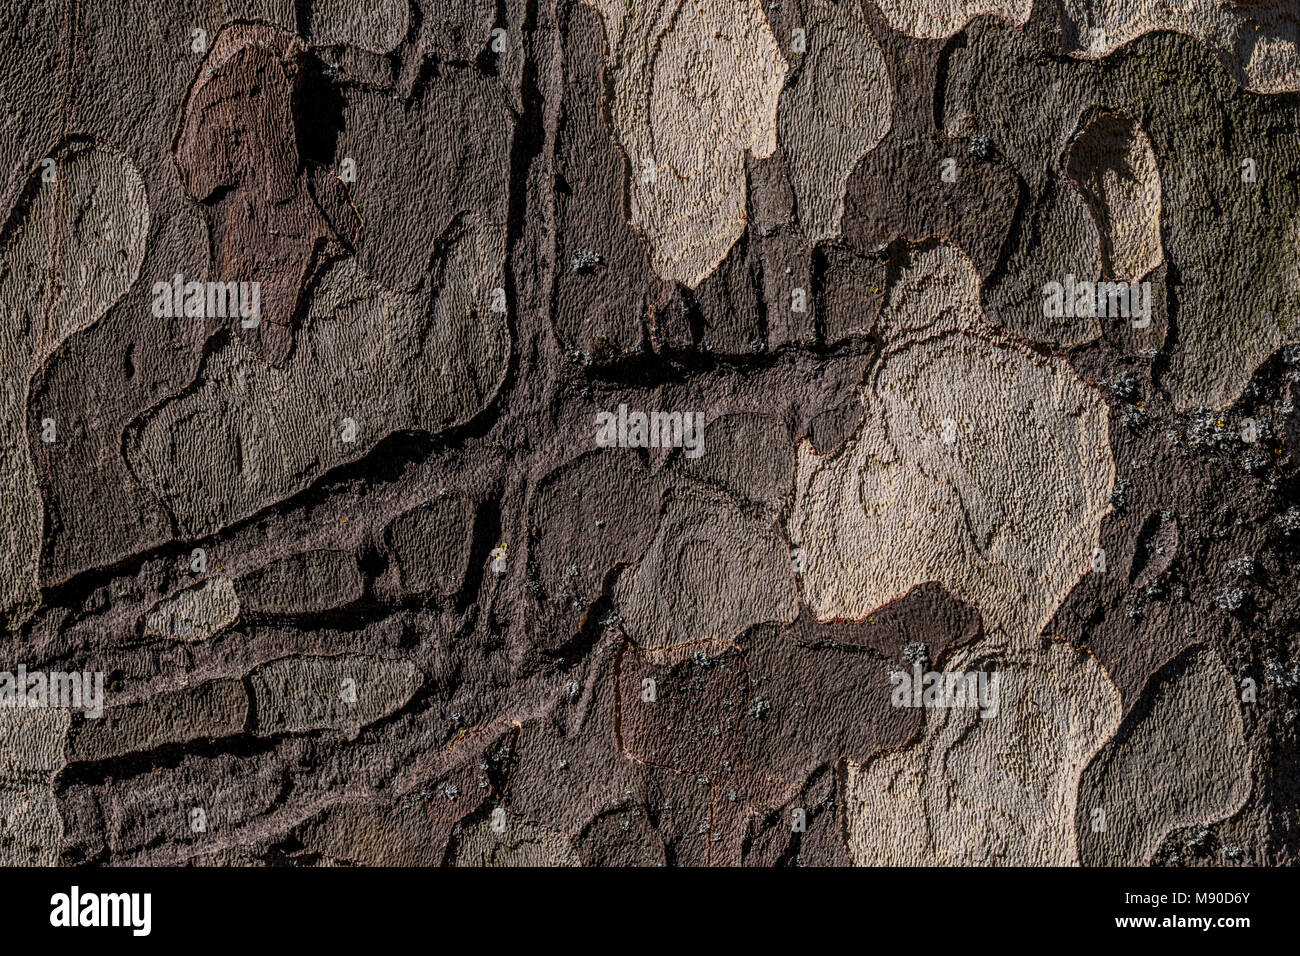 High resolution sycamore tree bark image suitable for unique mottled background texture Stock Photo